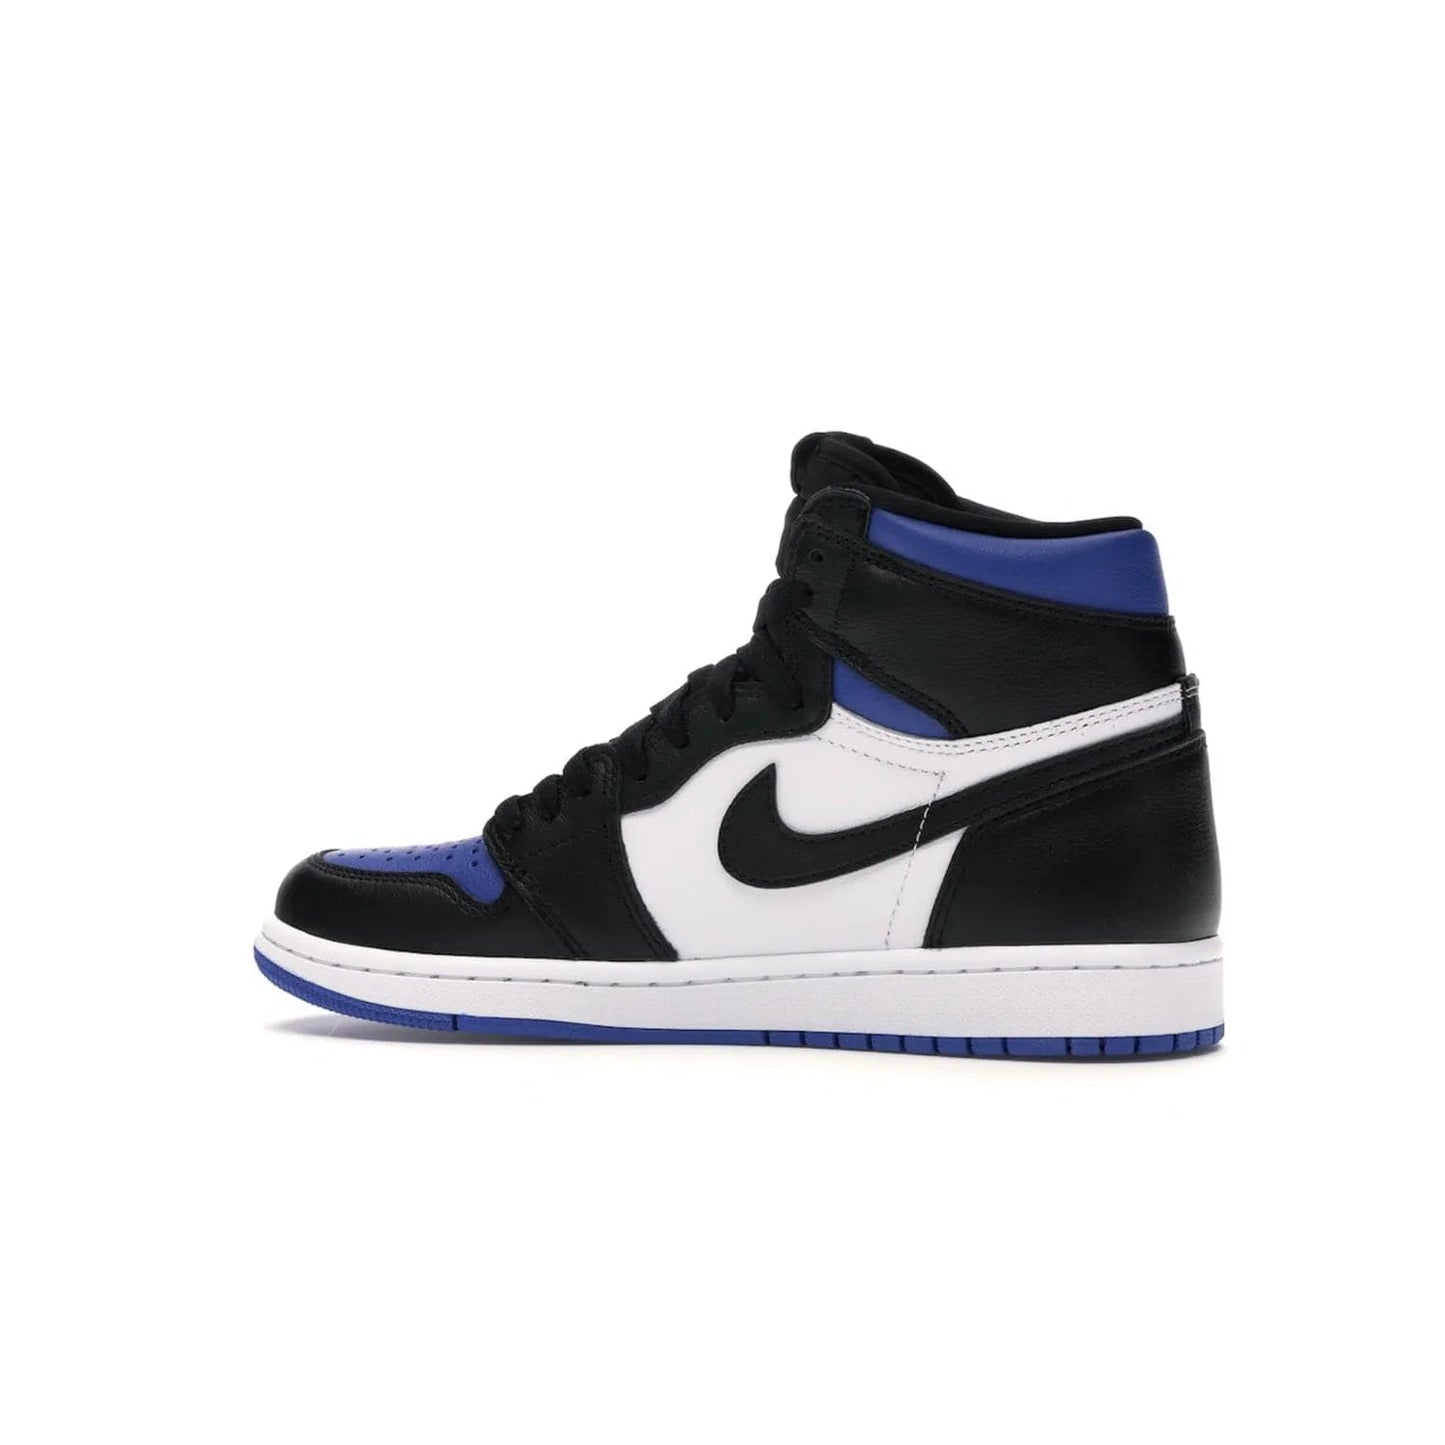 Jordan 1 Retro High Royal Toe - Image 21 - Only at www.BallersClubKickz.com - Refresh your look with the Jordan 1 Retro High Royal Toe. This classic AJ 1 sports a white and royal leather upper, black leather overlays, and branded leather tongue tag. Pick up today and set the streets ablaze.